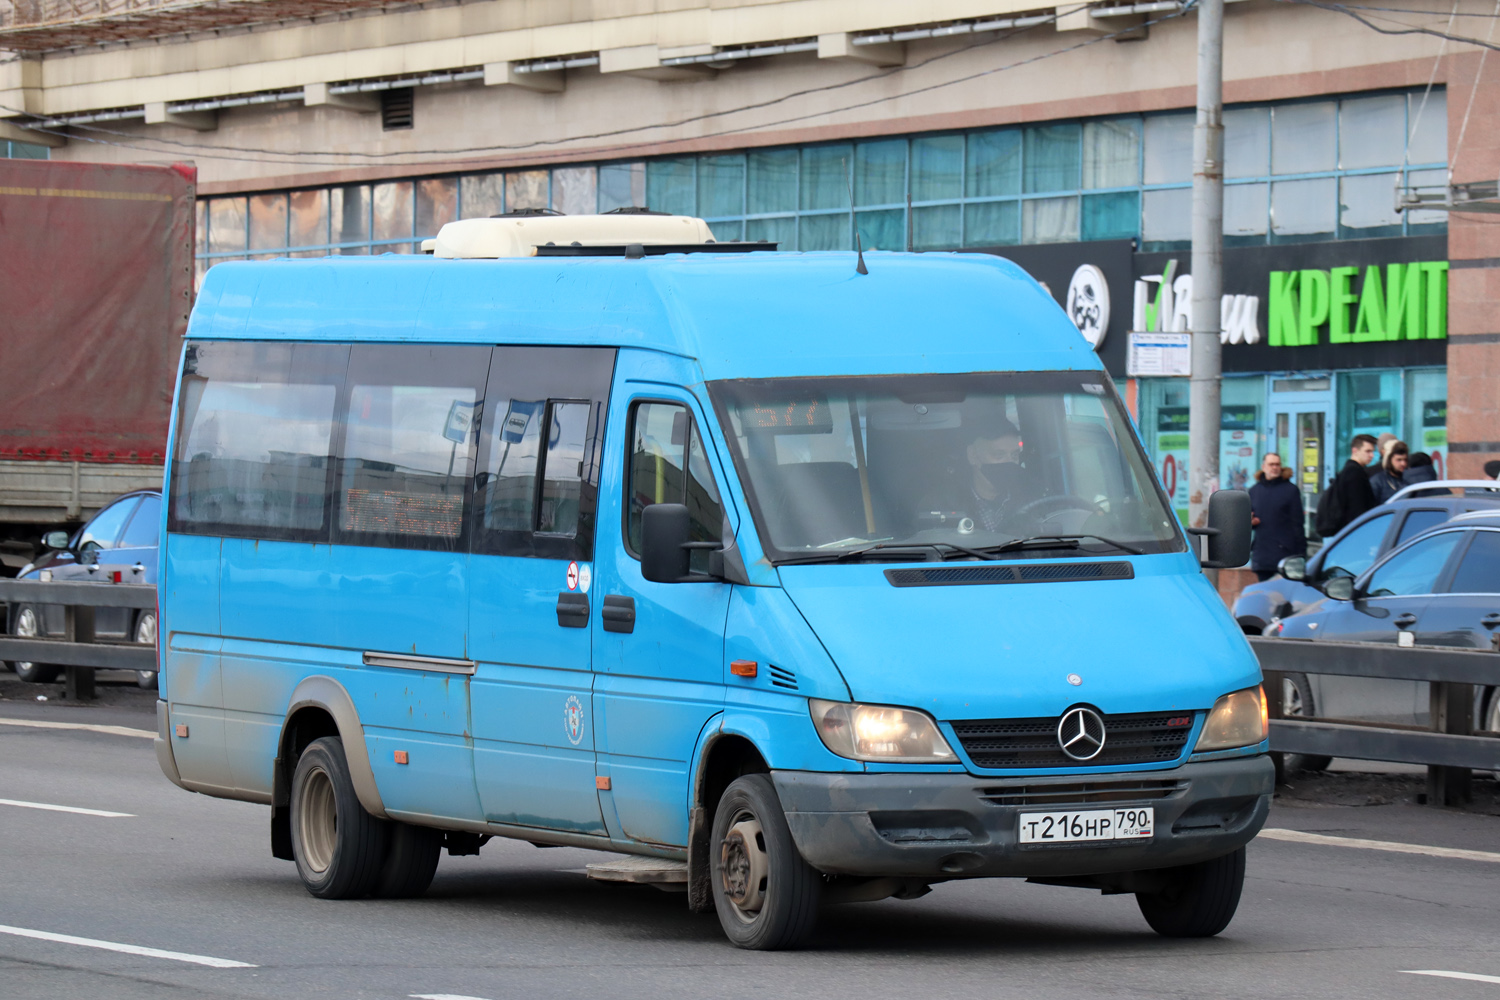 Moscow, Luidor-223206 (MB Sprinter Classic) # Т 216 НР 790